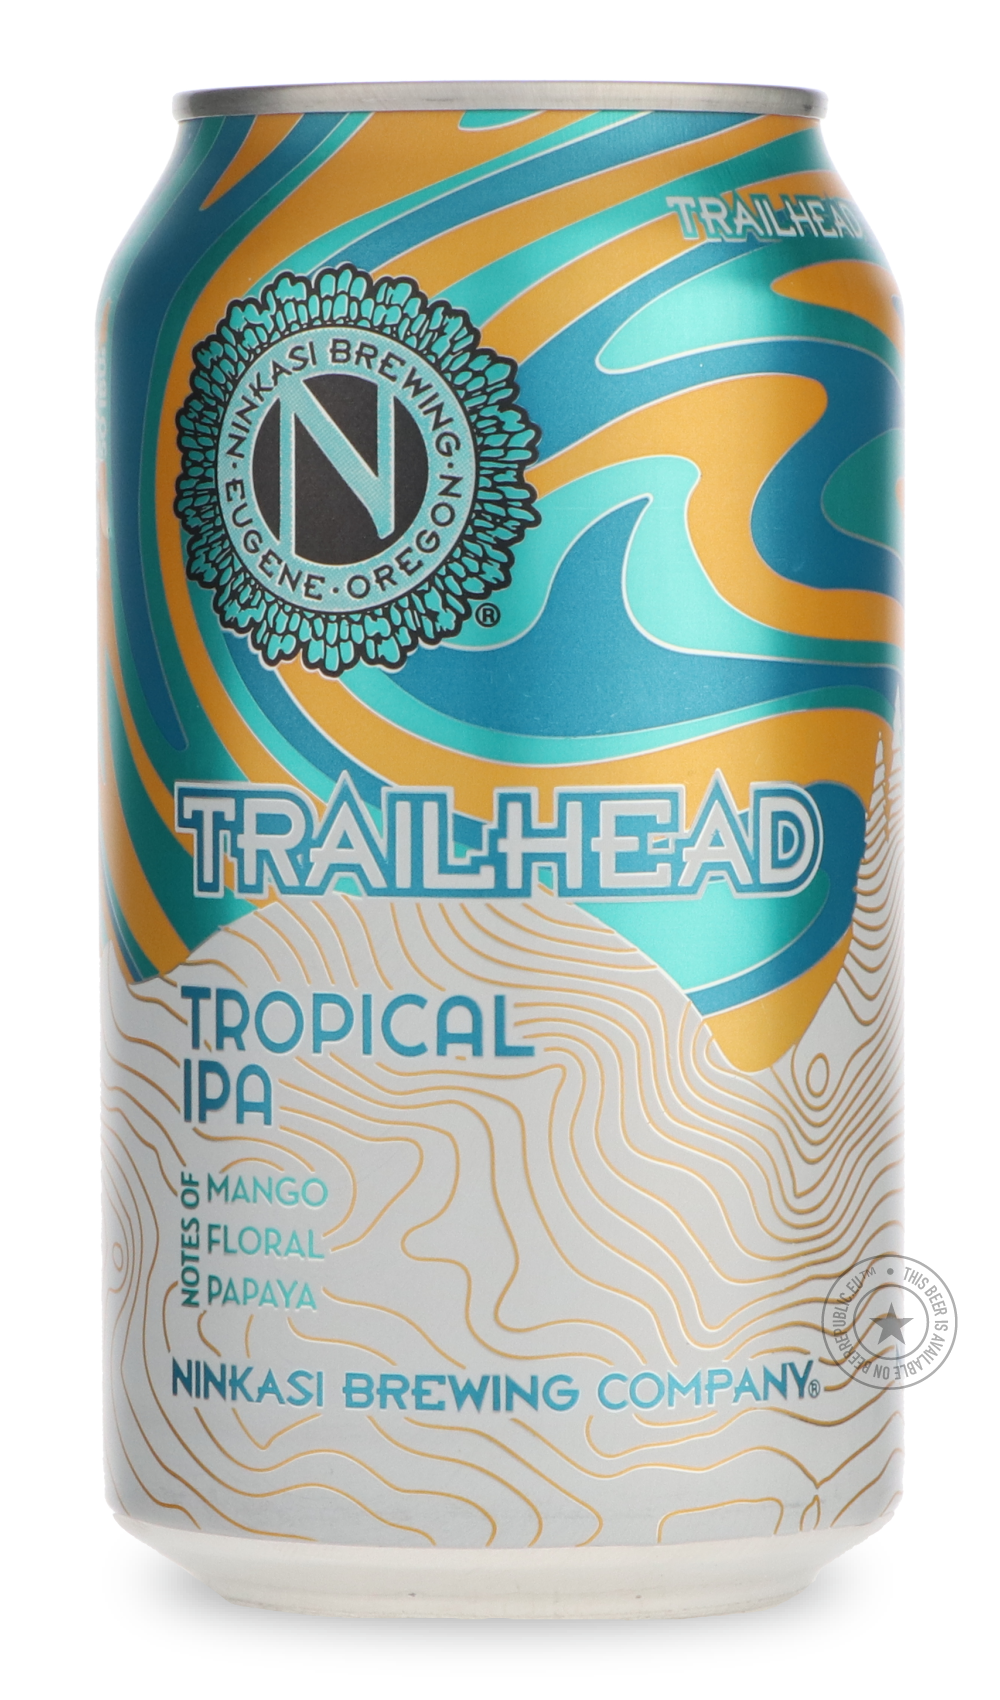 -Ninkasi- Trailhead-IPA- Only @ Beer Republic - The best online beer store for American & Canadian craft beer - Buy beer online from the USA and Canada - Bier online kopen - Amerikaans bier kopen - Craft beer store - Craft beer kopen - Amerikanisch bier kaufen - Bier online kaufen - Acheter biere online - IPA - Stout - Porter - New England IPA - Hazy IPA - Imperial Stout - Barrel Aged - Barrel Aged Imperial Stout - Brown - Dark beer - Blond - Blonde - Pilsner - Lager - Wheat - Weizen - Amber - Barley Wine -